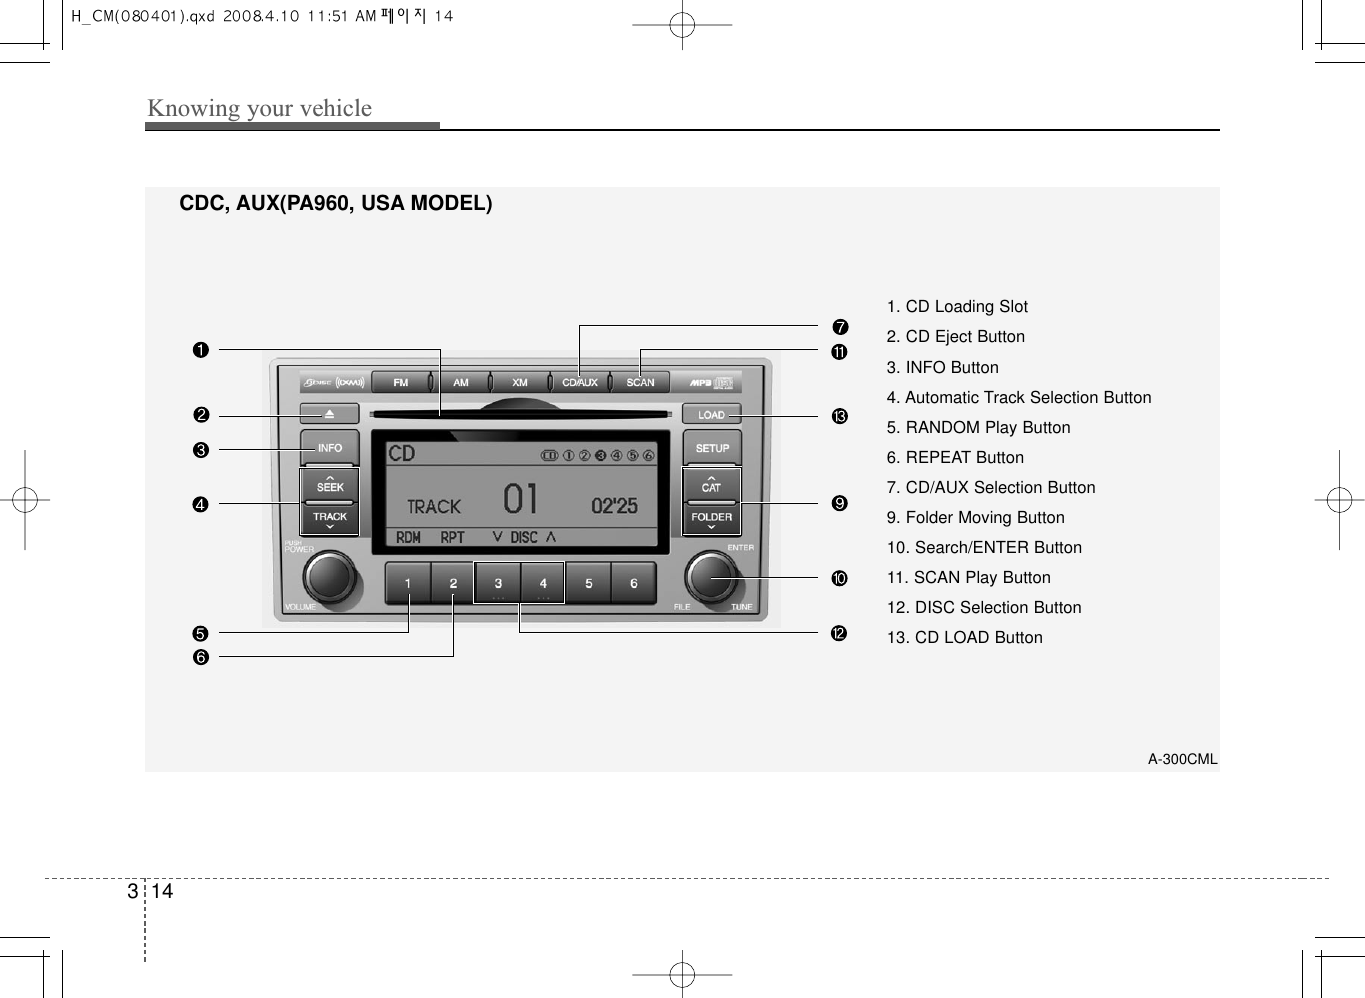 Knowing your vehicle143CDC, AUX(PA960, USA MODEL) A-300CML1. CD Loading Slot2. CD Eject Button3. INFO Button4. Automatic Track Selection Button5. RANDOM Play Button6. REPEAT Button7. CD/AUX Selection Button9. Folder Moving Button10. Search/ENTER Button11. SCAN Play Button12. DISC Selection Button13. CD LOAD Button